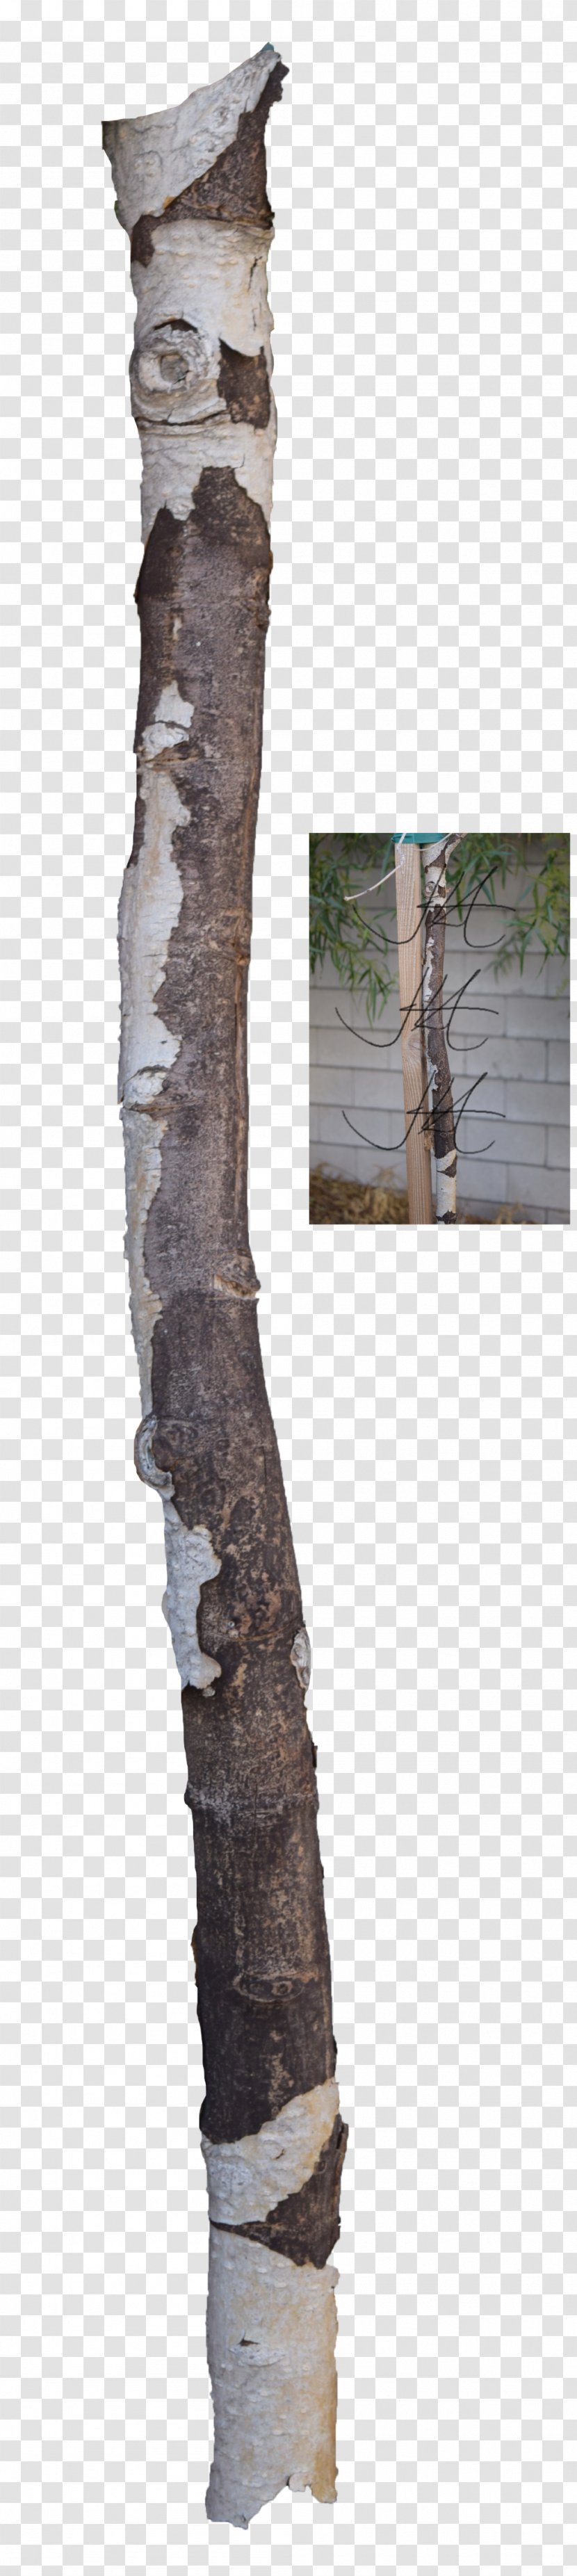 Tree Trunk Branch Wood Transparent PNG